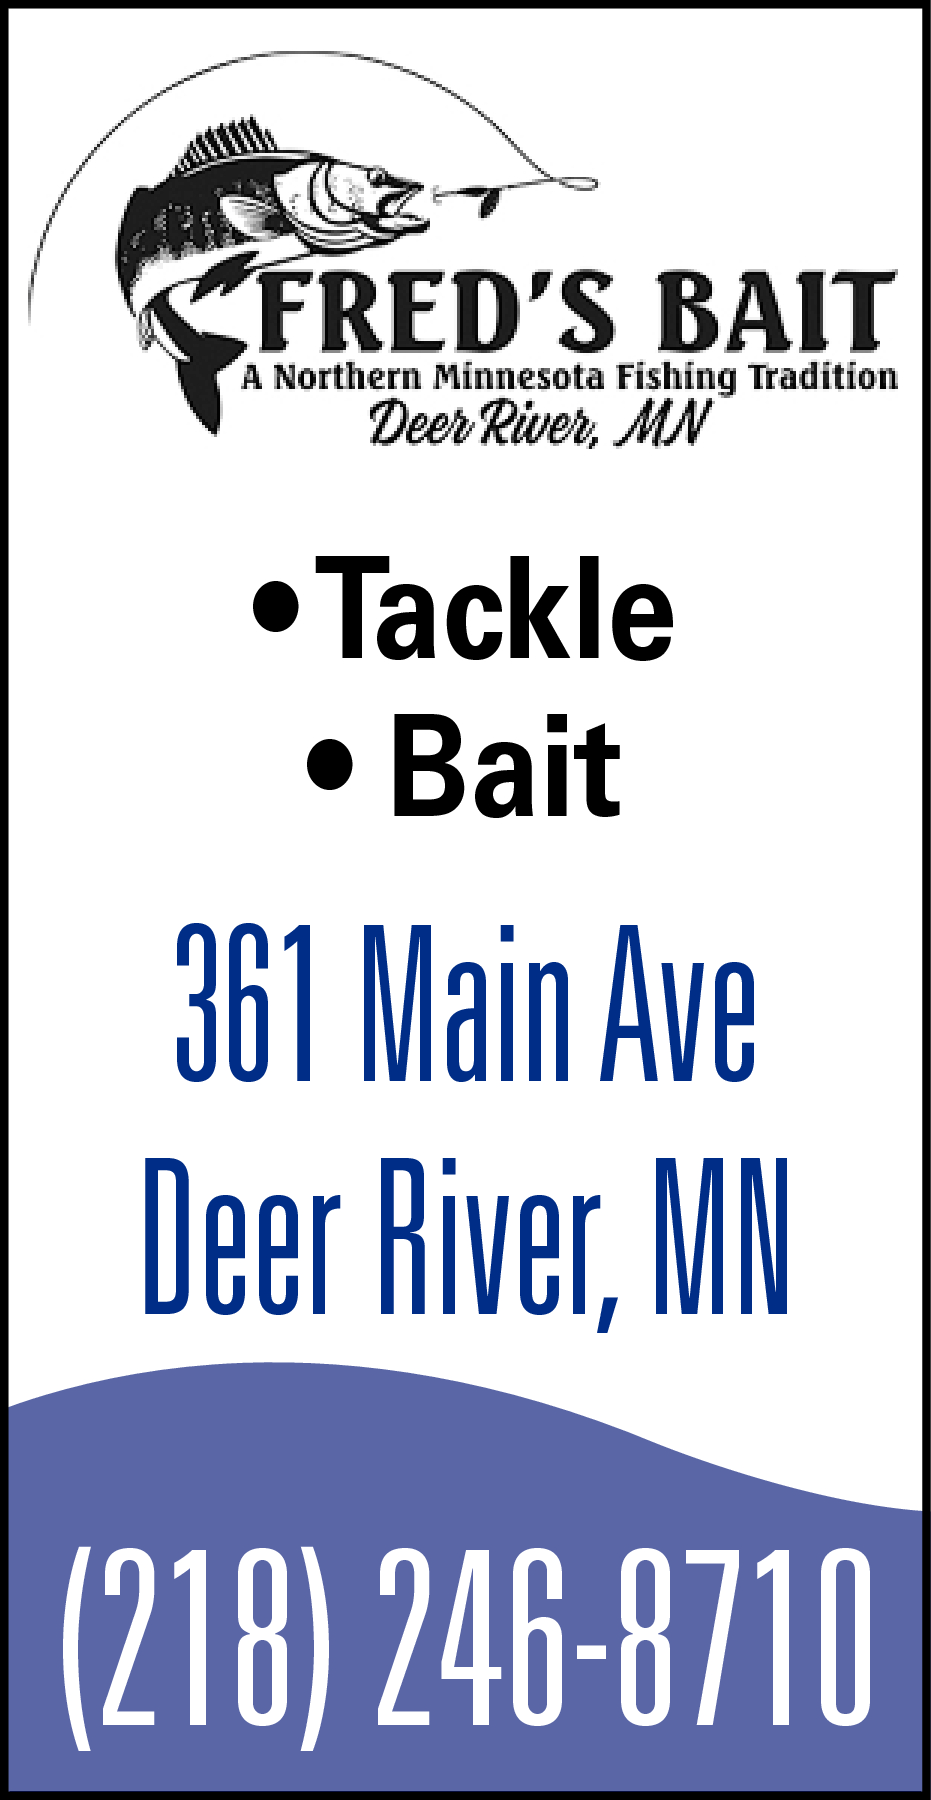 A Northern Minnesota Fishing Tradition, Fred's Bait, Deer River, MN